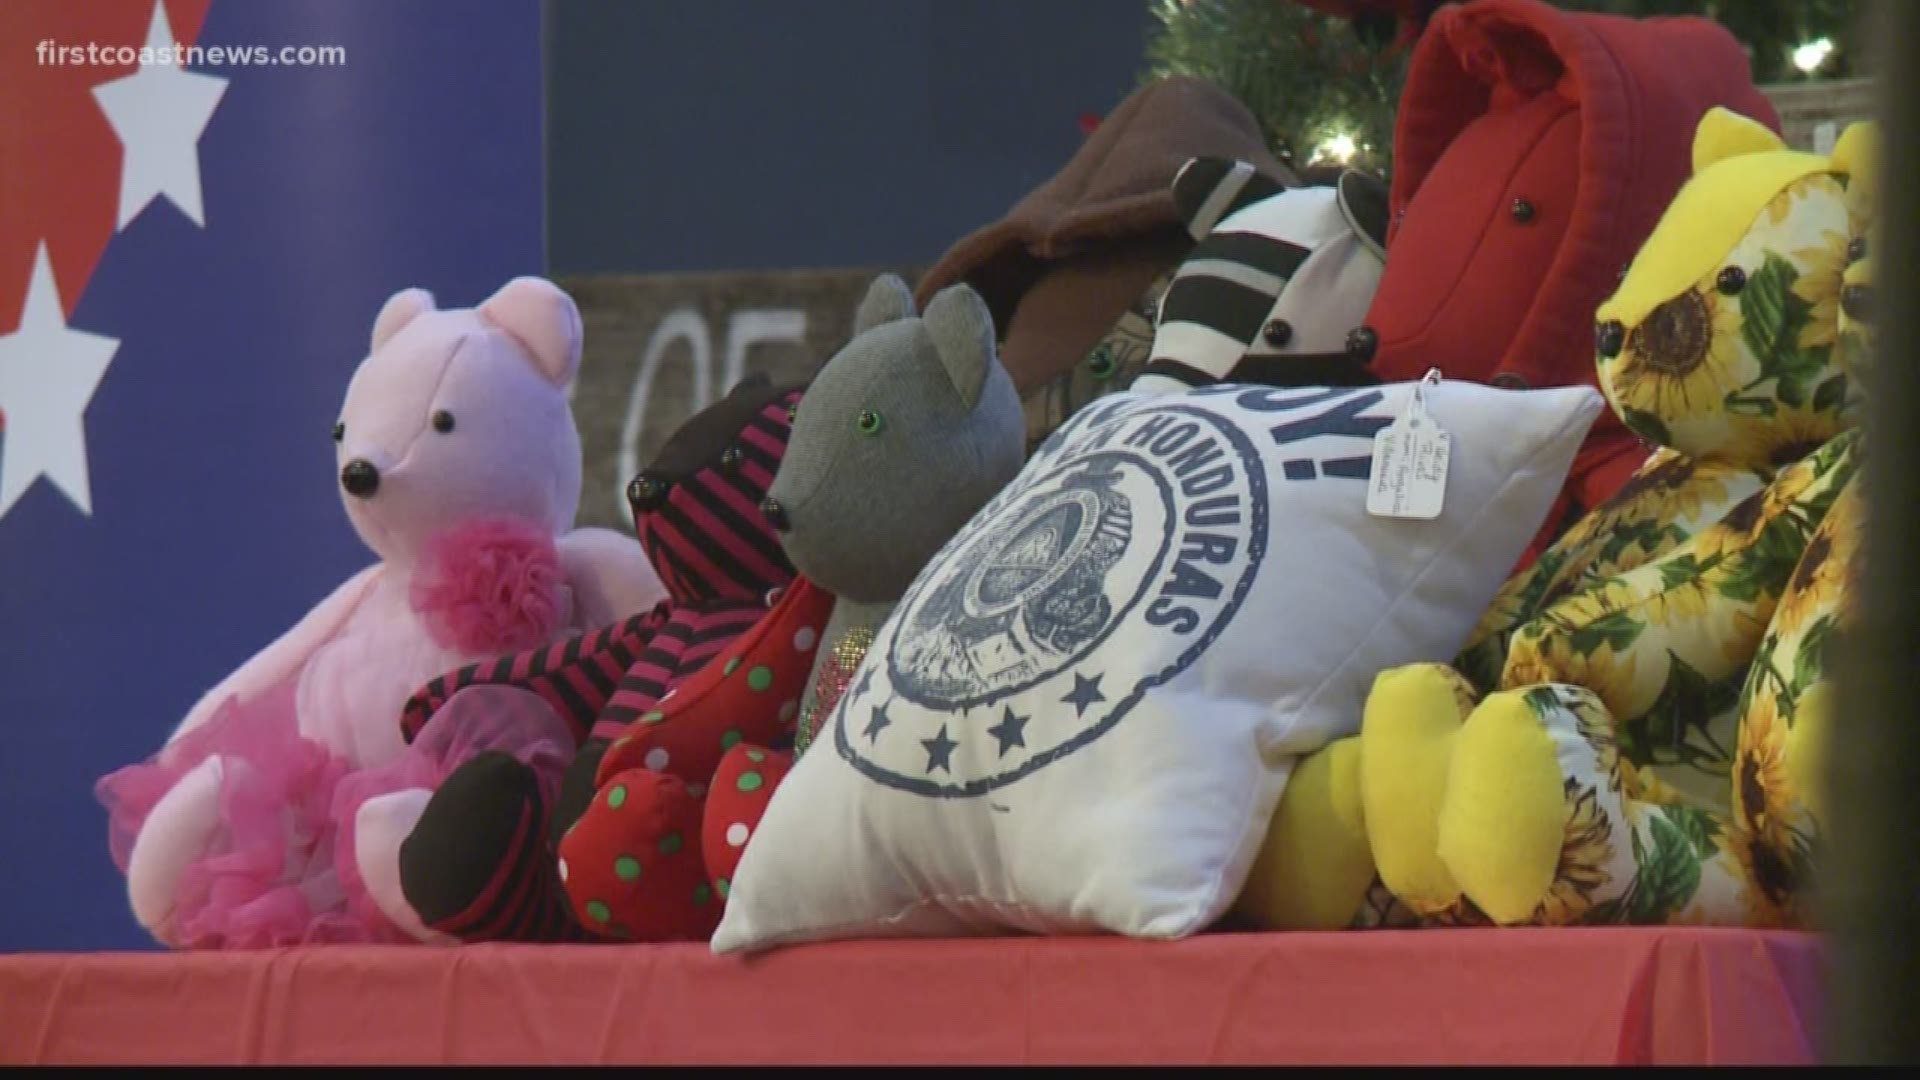 An Orange Park woman helps give closure to families by creating teddy bears out of the clothing of their deceased loved ones.